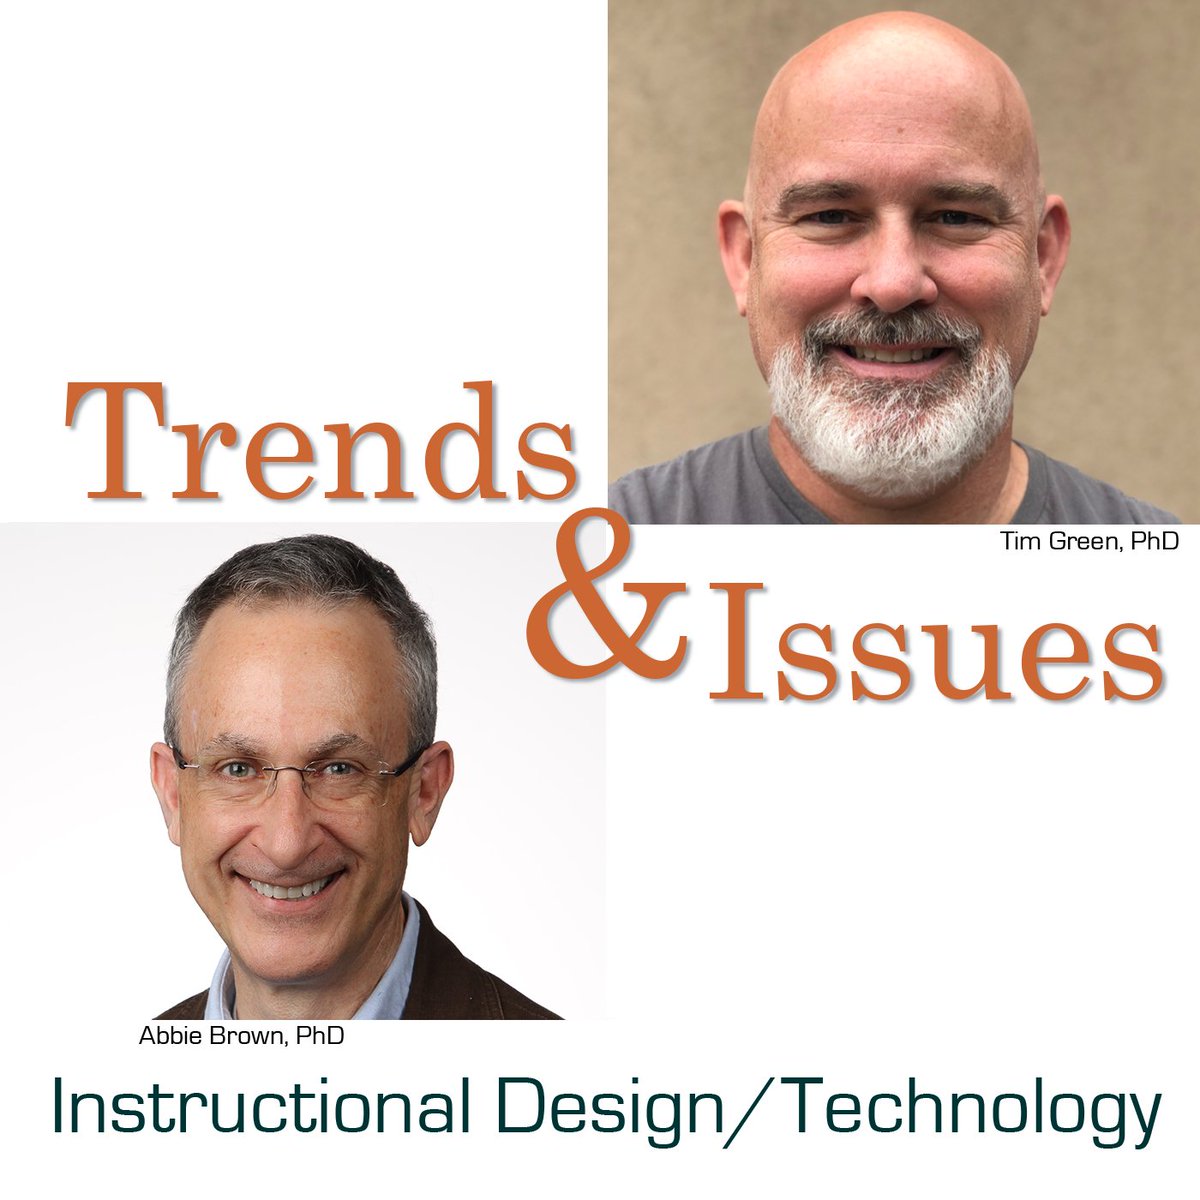 Podcast Episode 210: Your fifteen-minute audio update of instructional design/technology news from the past two weeks - @theedtechdoctor #edtech bit.ly/3sQ0k8G